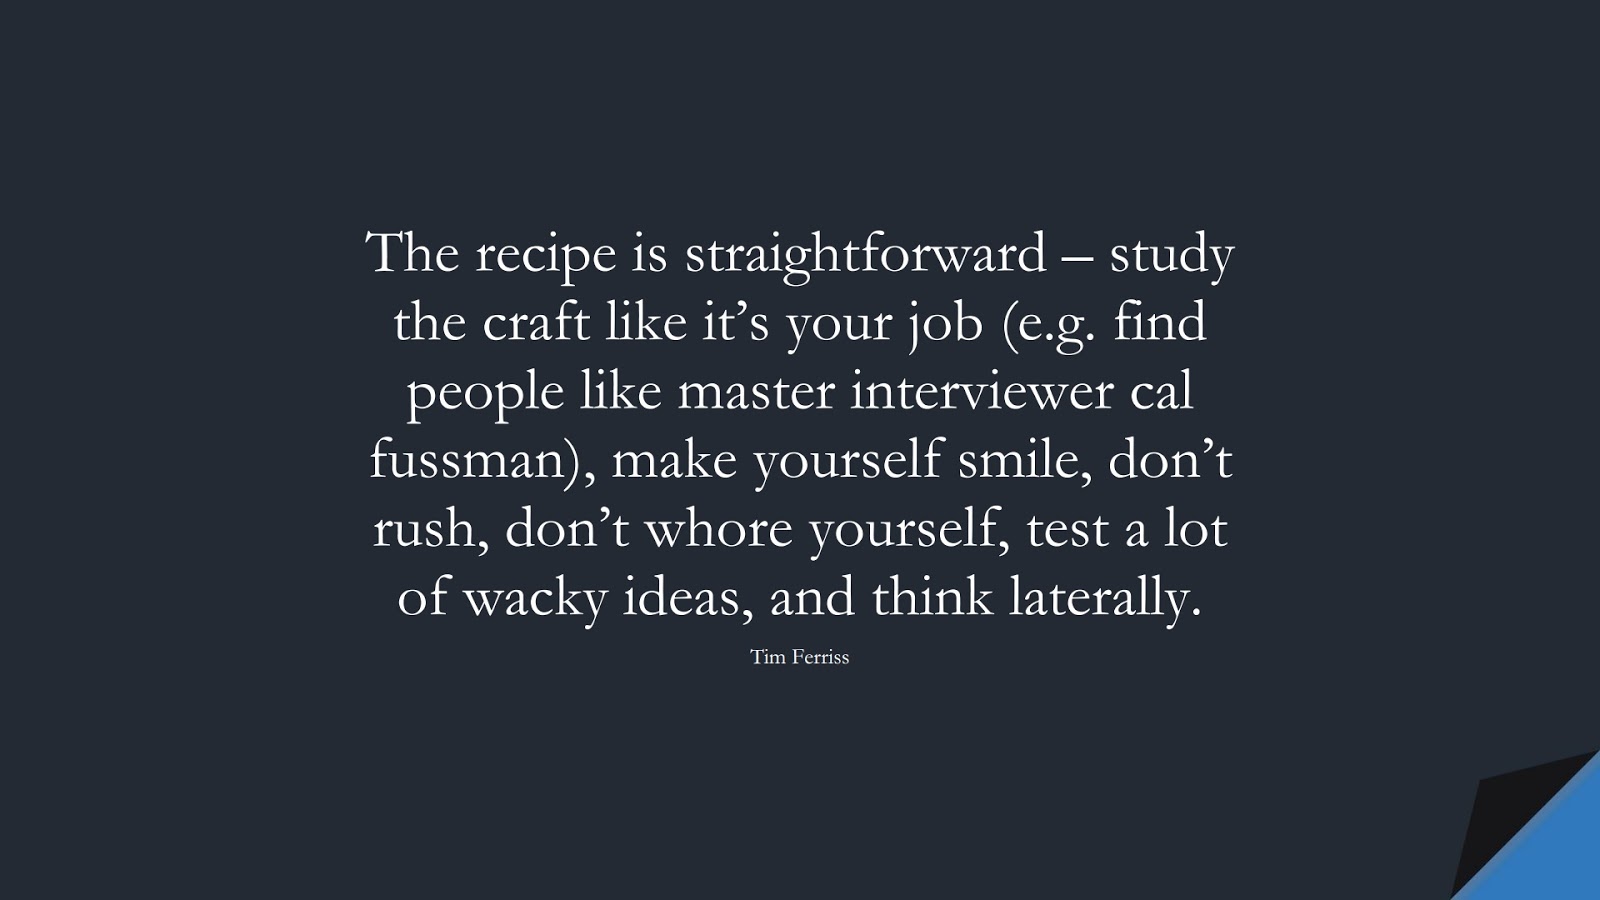 The recipe is straightforward – study the craft like it’s your job (e.g. find people like master interviewer cal fussman), make yourself smile, don’t rush, don’t whore yourself, test a lot of wacky ideas, and think laterally. (Tim Ferriss);  #TimFerrissQuotes